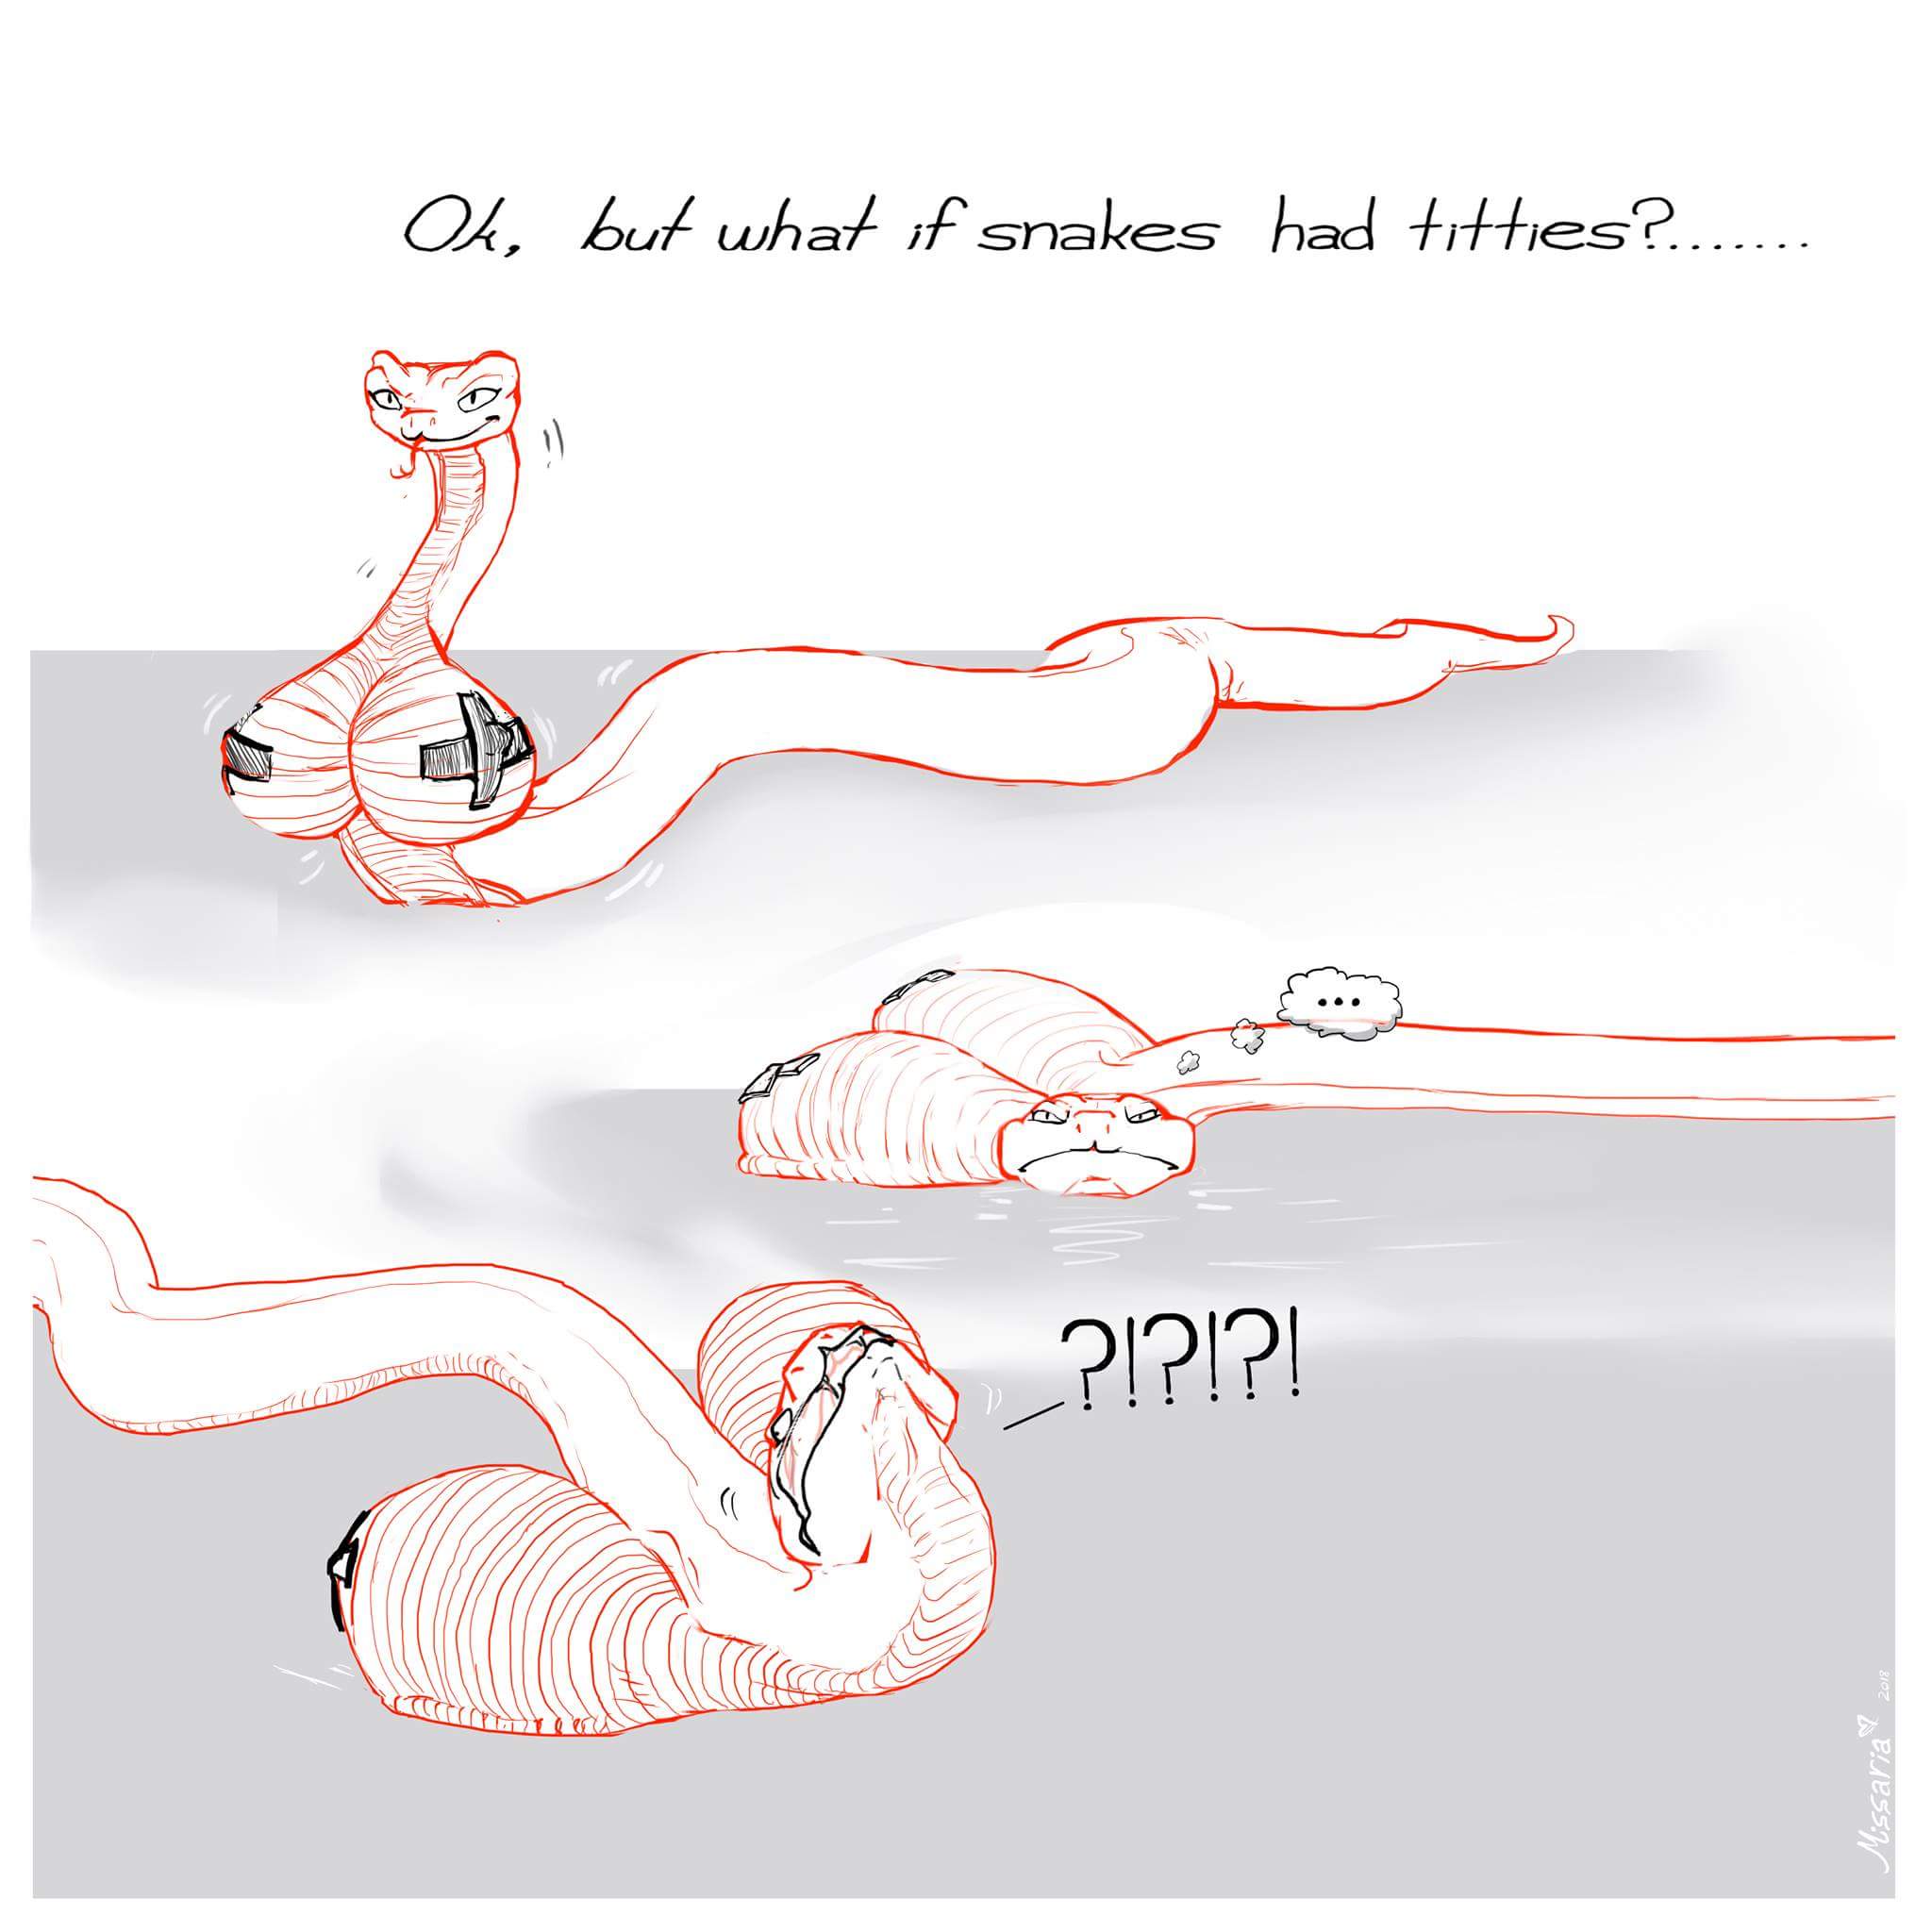 i m gonna have sexual thoughts - Ok, but what if snakes had titties?...... N 2013 10 0 0 Missaria